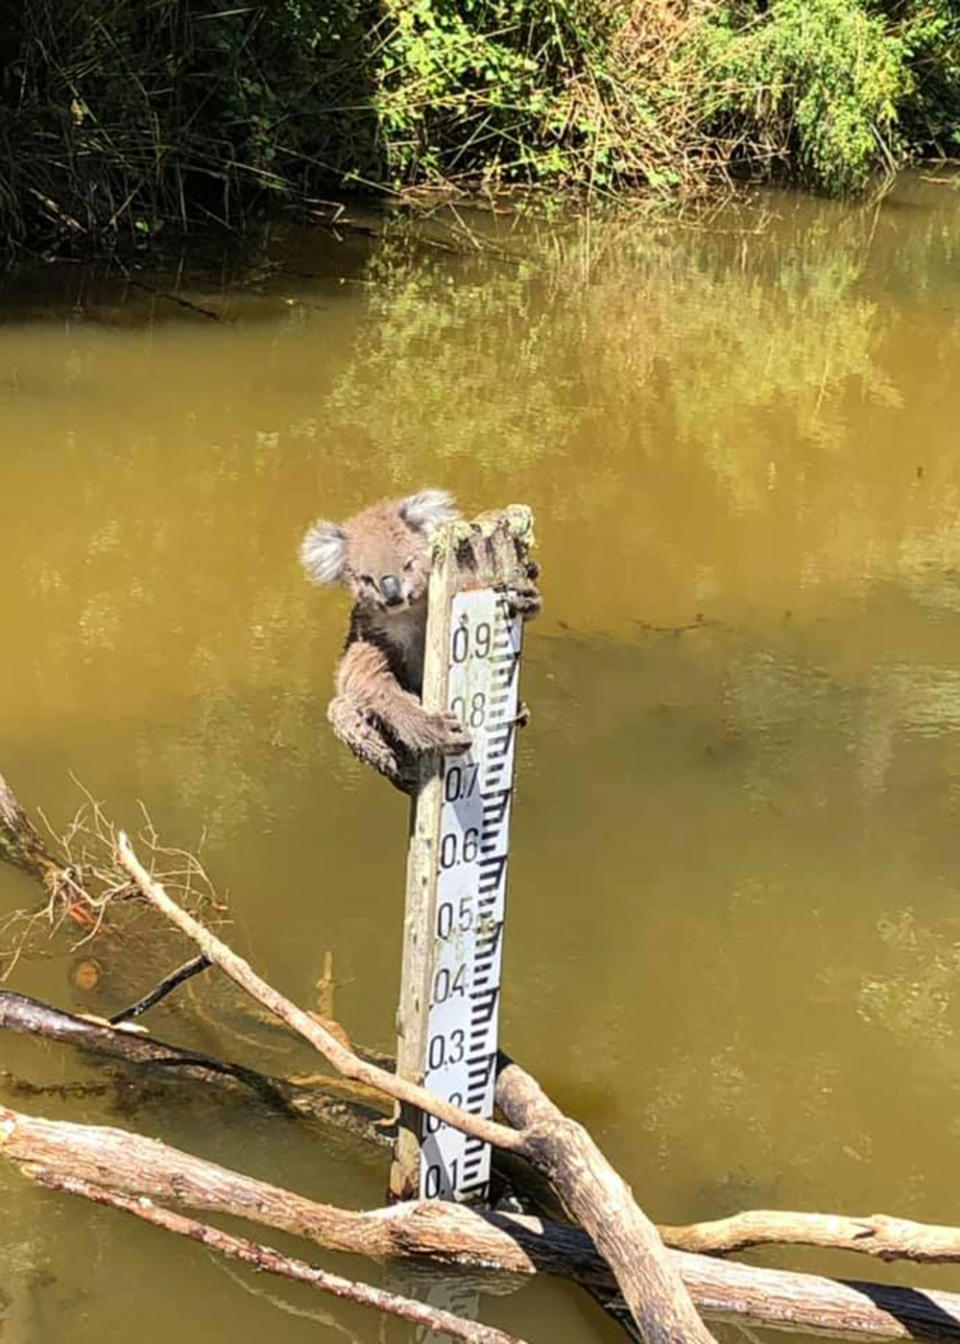 The koala was clinging to the post for a number of hours in the middle of the day. Source: SurfCoast Wildlife Shelters/Facebook